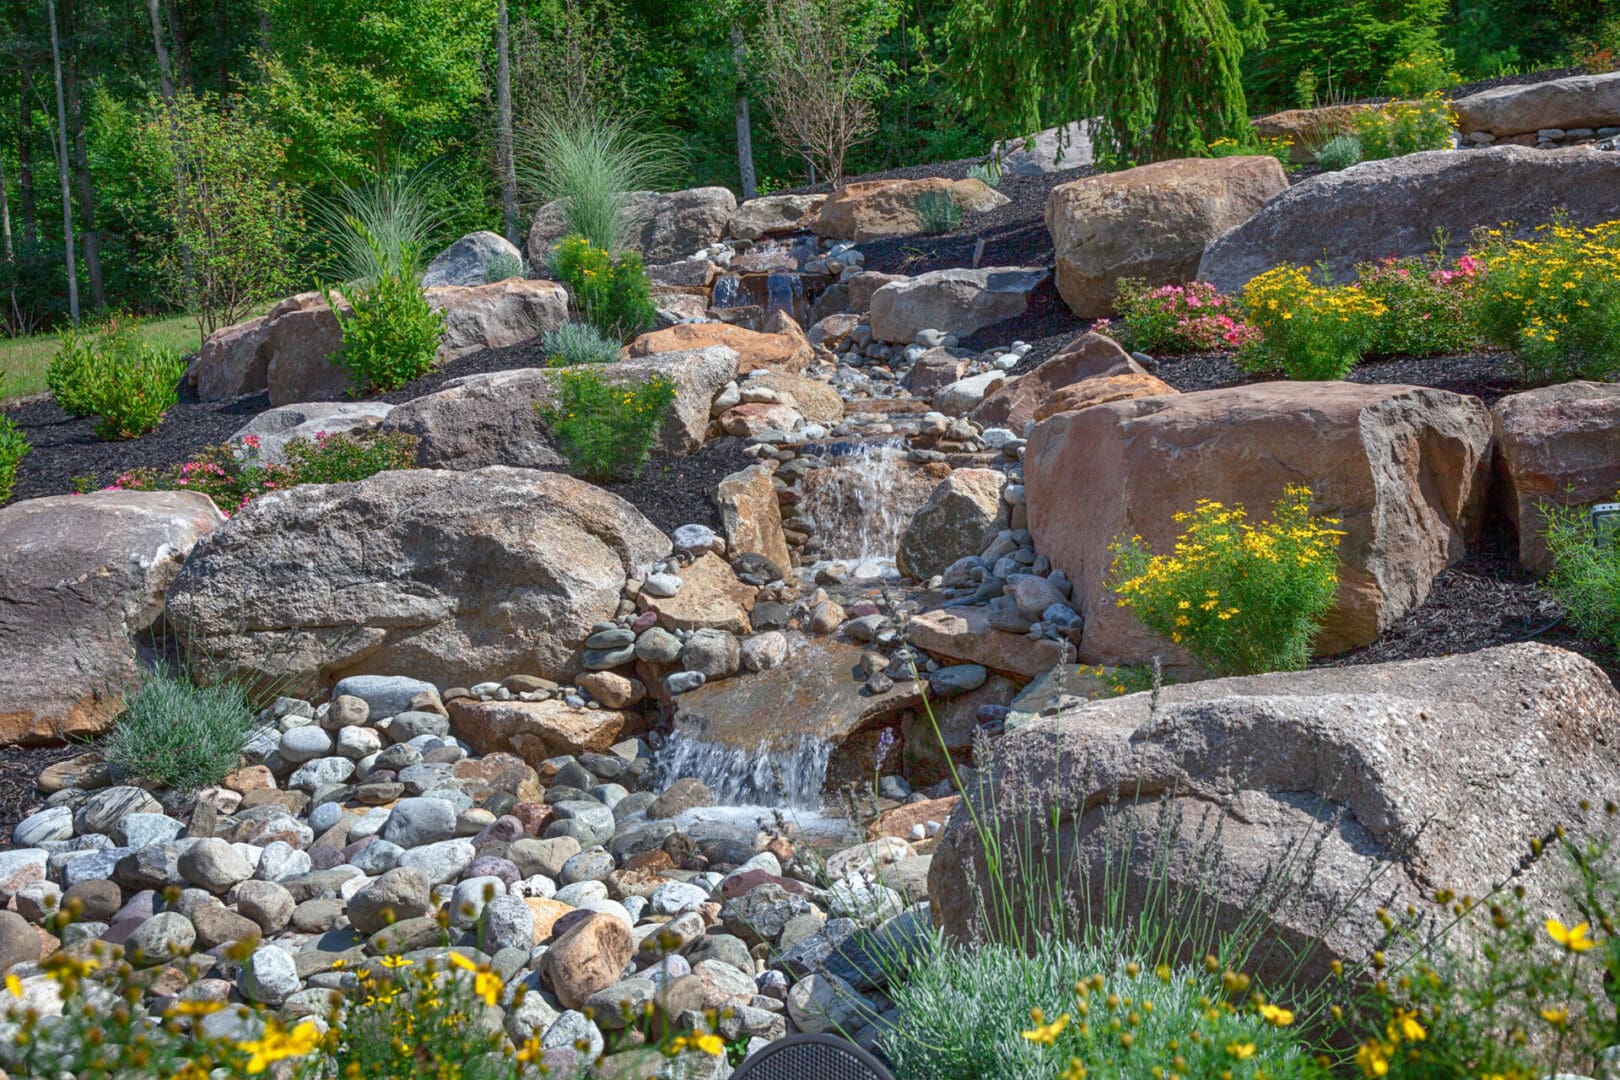 A charming water feature in a rocky area.